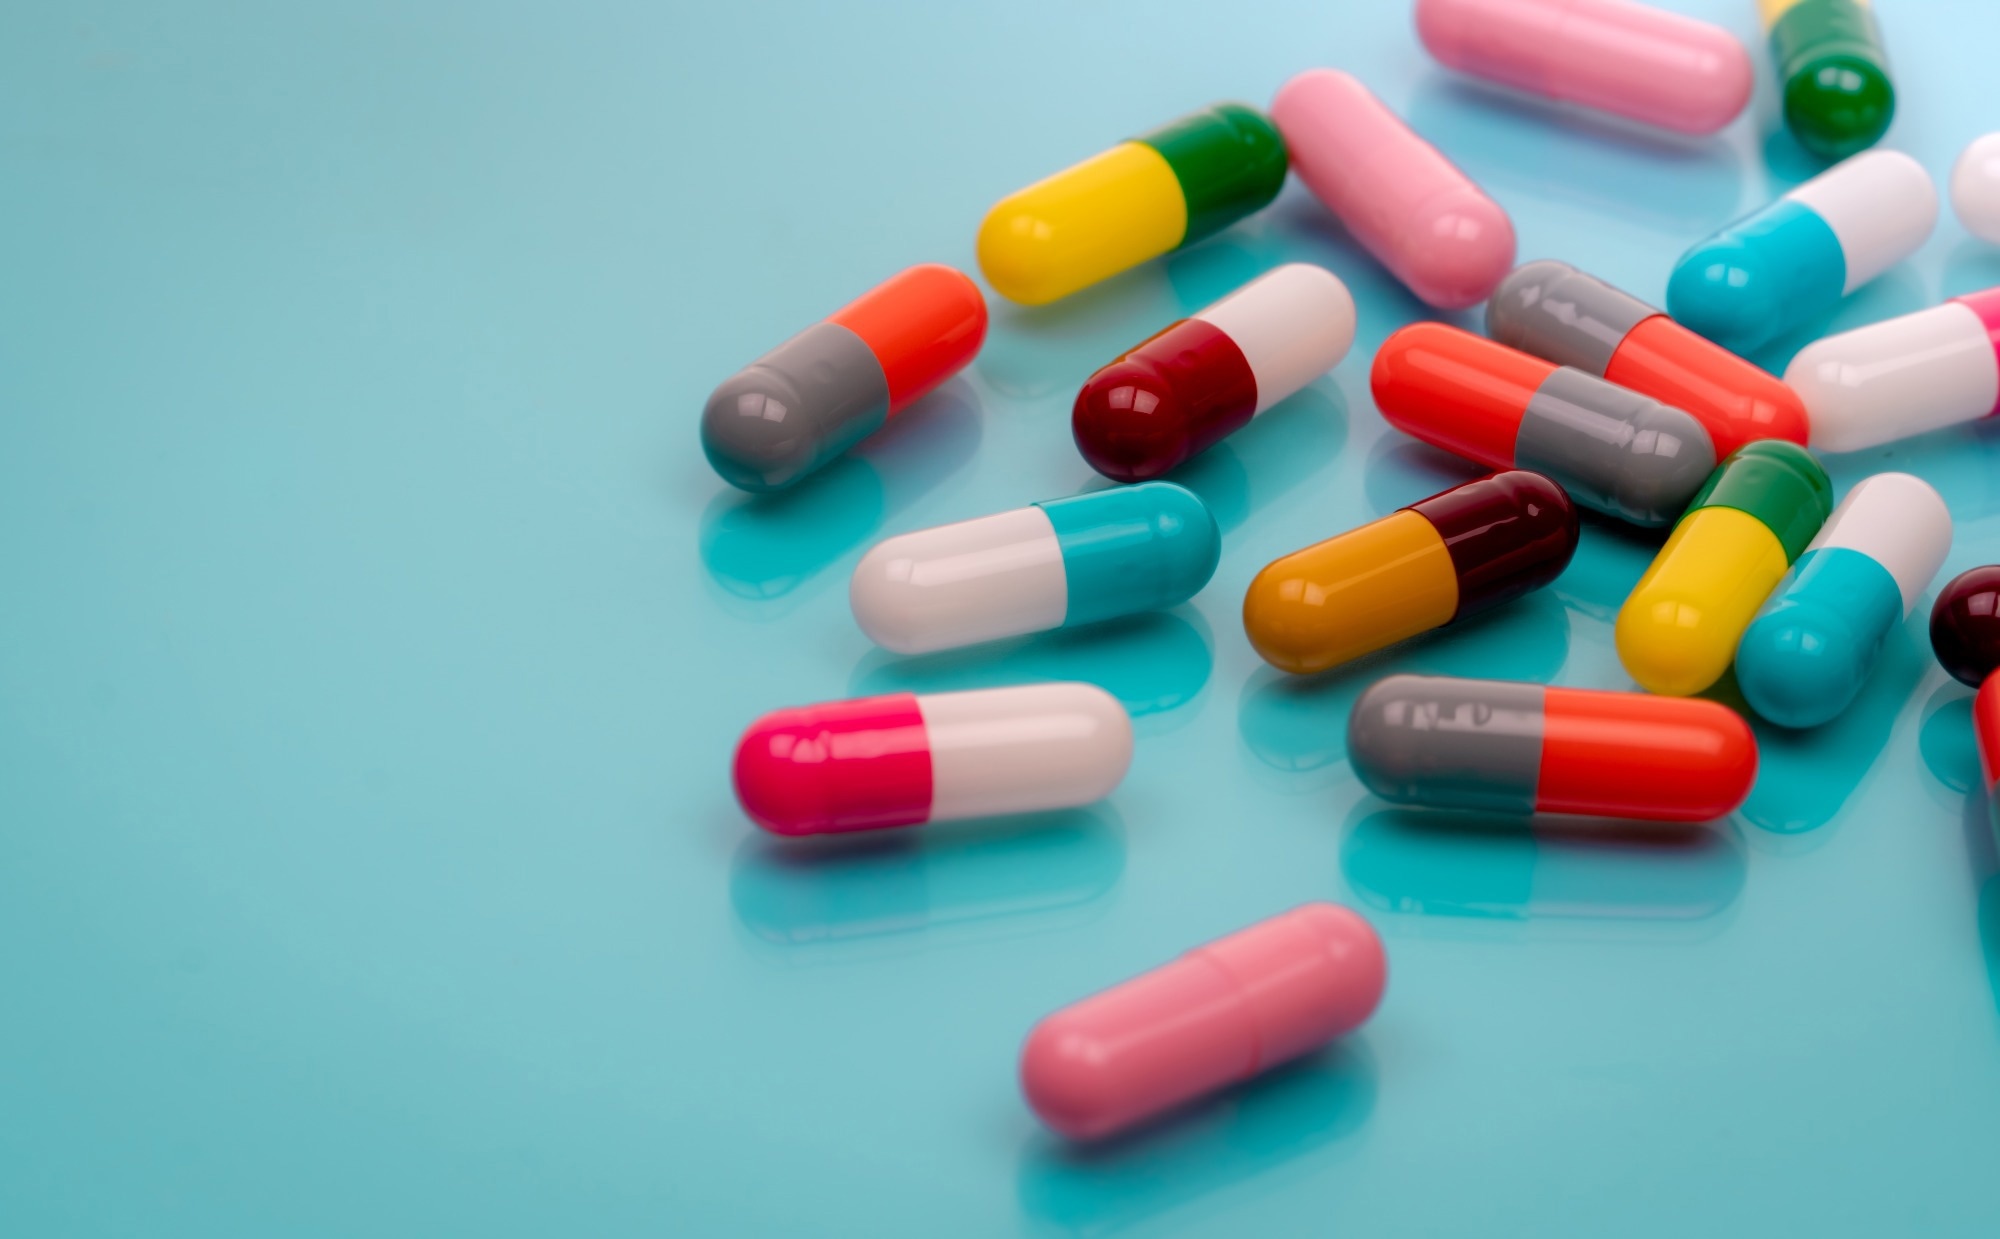 Study: Antimicrobial Resistance. Image Credit: Fahroni/Shutterstock